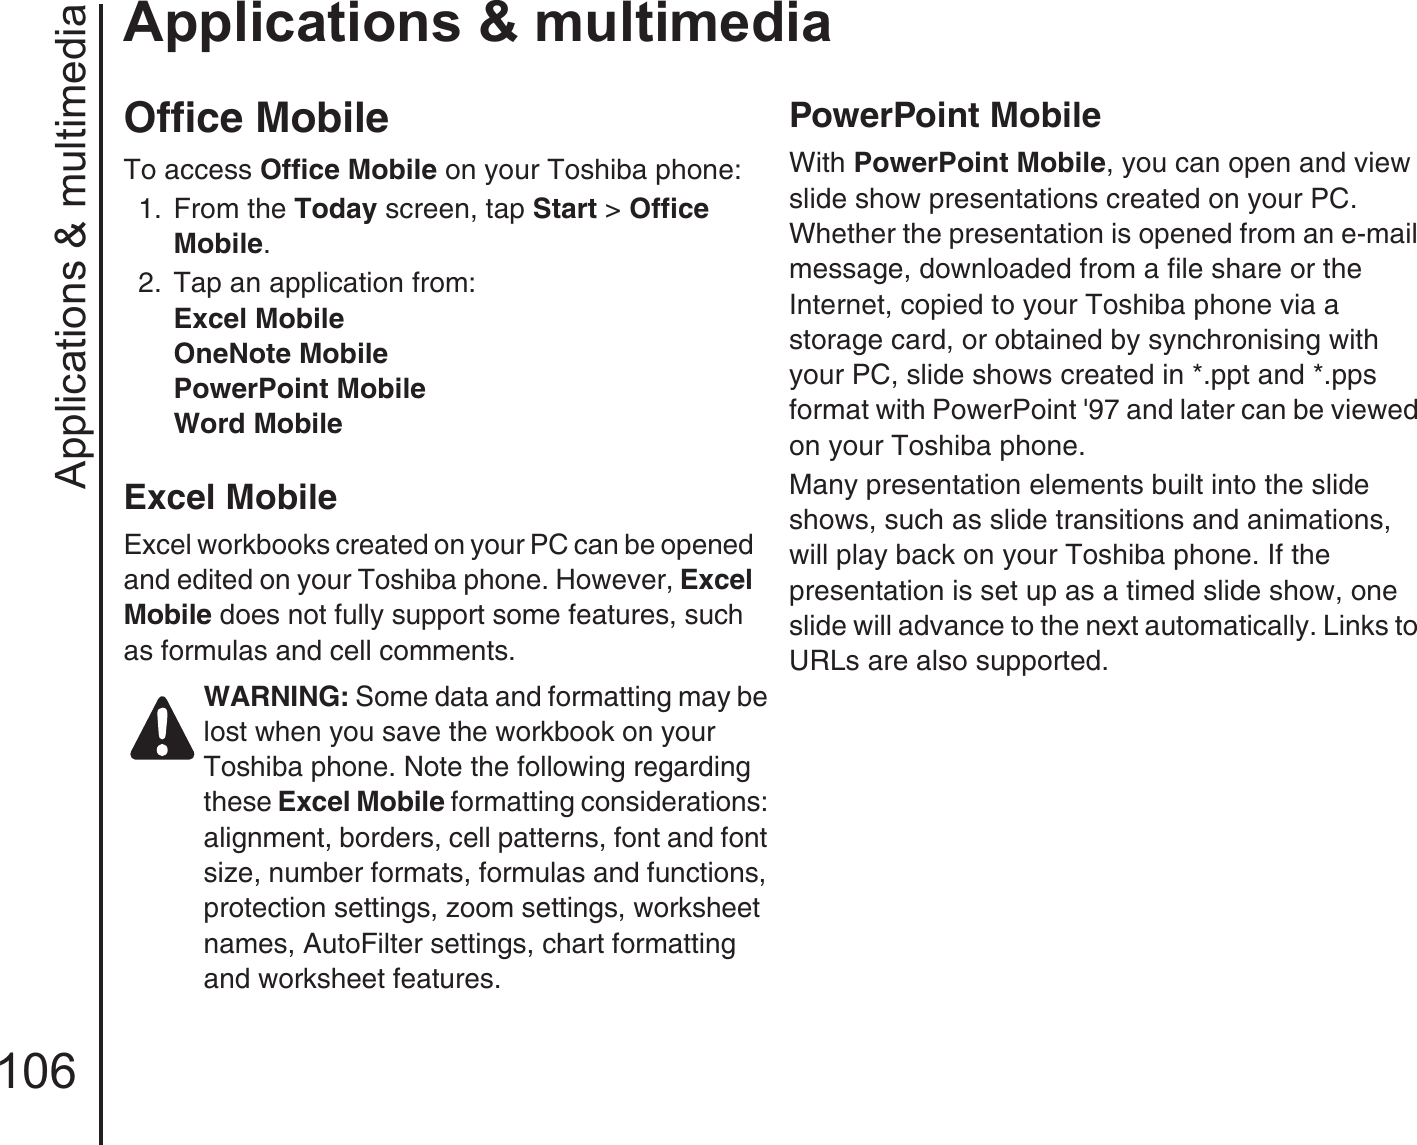 Applications &amp; multimedia106Applications &amp; multimediaOffice MobileTo access Office Mobile on your Toshiba phone:1.  From the Today screen, tap Start &gt; Office Mobile.2.  Tap an application from:Excel MobileOneNote MobilePowerPoint MobileWord MobileExcel MobileExcel workbooks created on your PC can be opened and edited on your Toshiba phone. However, Excel Mobile does not fully support some features, such as formulas and cell comments.PowerPoint MobileWith PowerPoint Mobile, you can open and view slide show presentations created on your PC. Whether the presentation is opened from an e-mail message, downloaded from a file share or the Internet, copied to your Toshiba phone via a storage card, or obtained by synchronising with your PC, slide shows created in *.ppt and *.pps format with PowerPoint &apos;97 and later can be viewed on your Toshiba phone.Many presentation elements built into the slide shows, such as slide transitions and animations, will play back on your Toshiba phone. If the presentation is set up as a timed slide show, one slide will advance to the next automatically. Links to URLs are also supported.WARNING: Some data and formatting may be lost when you save the workbook on your Toshiba phone. Note the following regarding these Excel Mobile formatting considerations: alignment, borders, cell patterns, font and font size, number formats, formulas and functions, protection settings, zoom settings, worksheet names, AutoFilter settings, chart formatting and worksheet features.